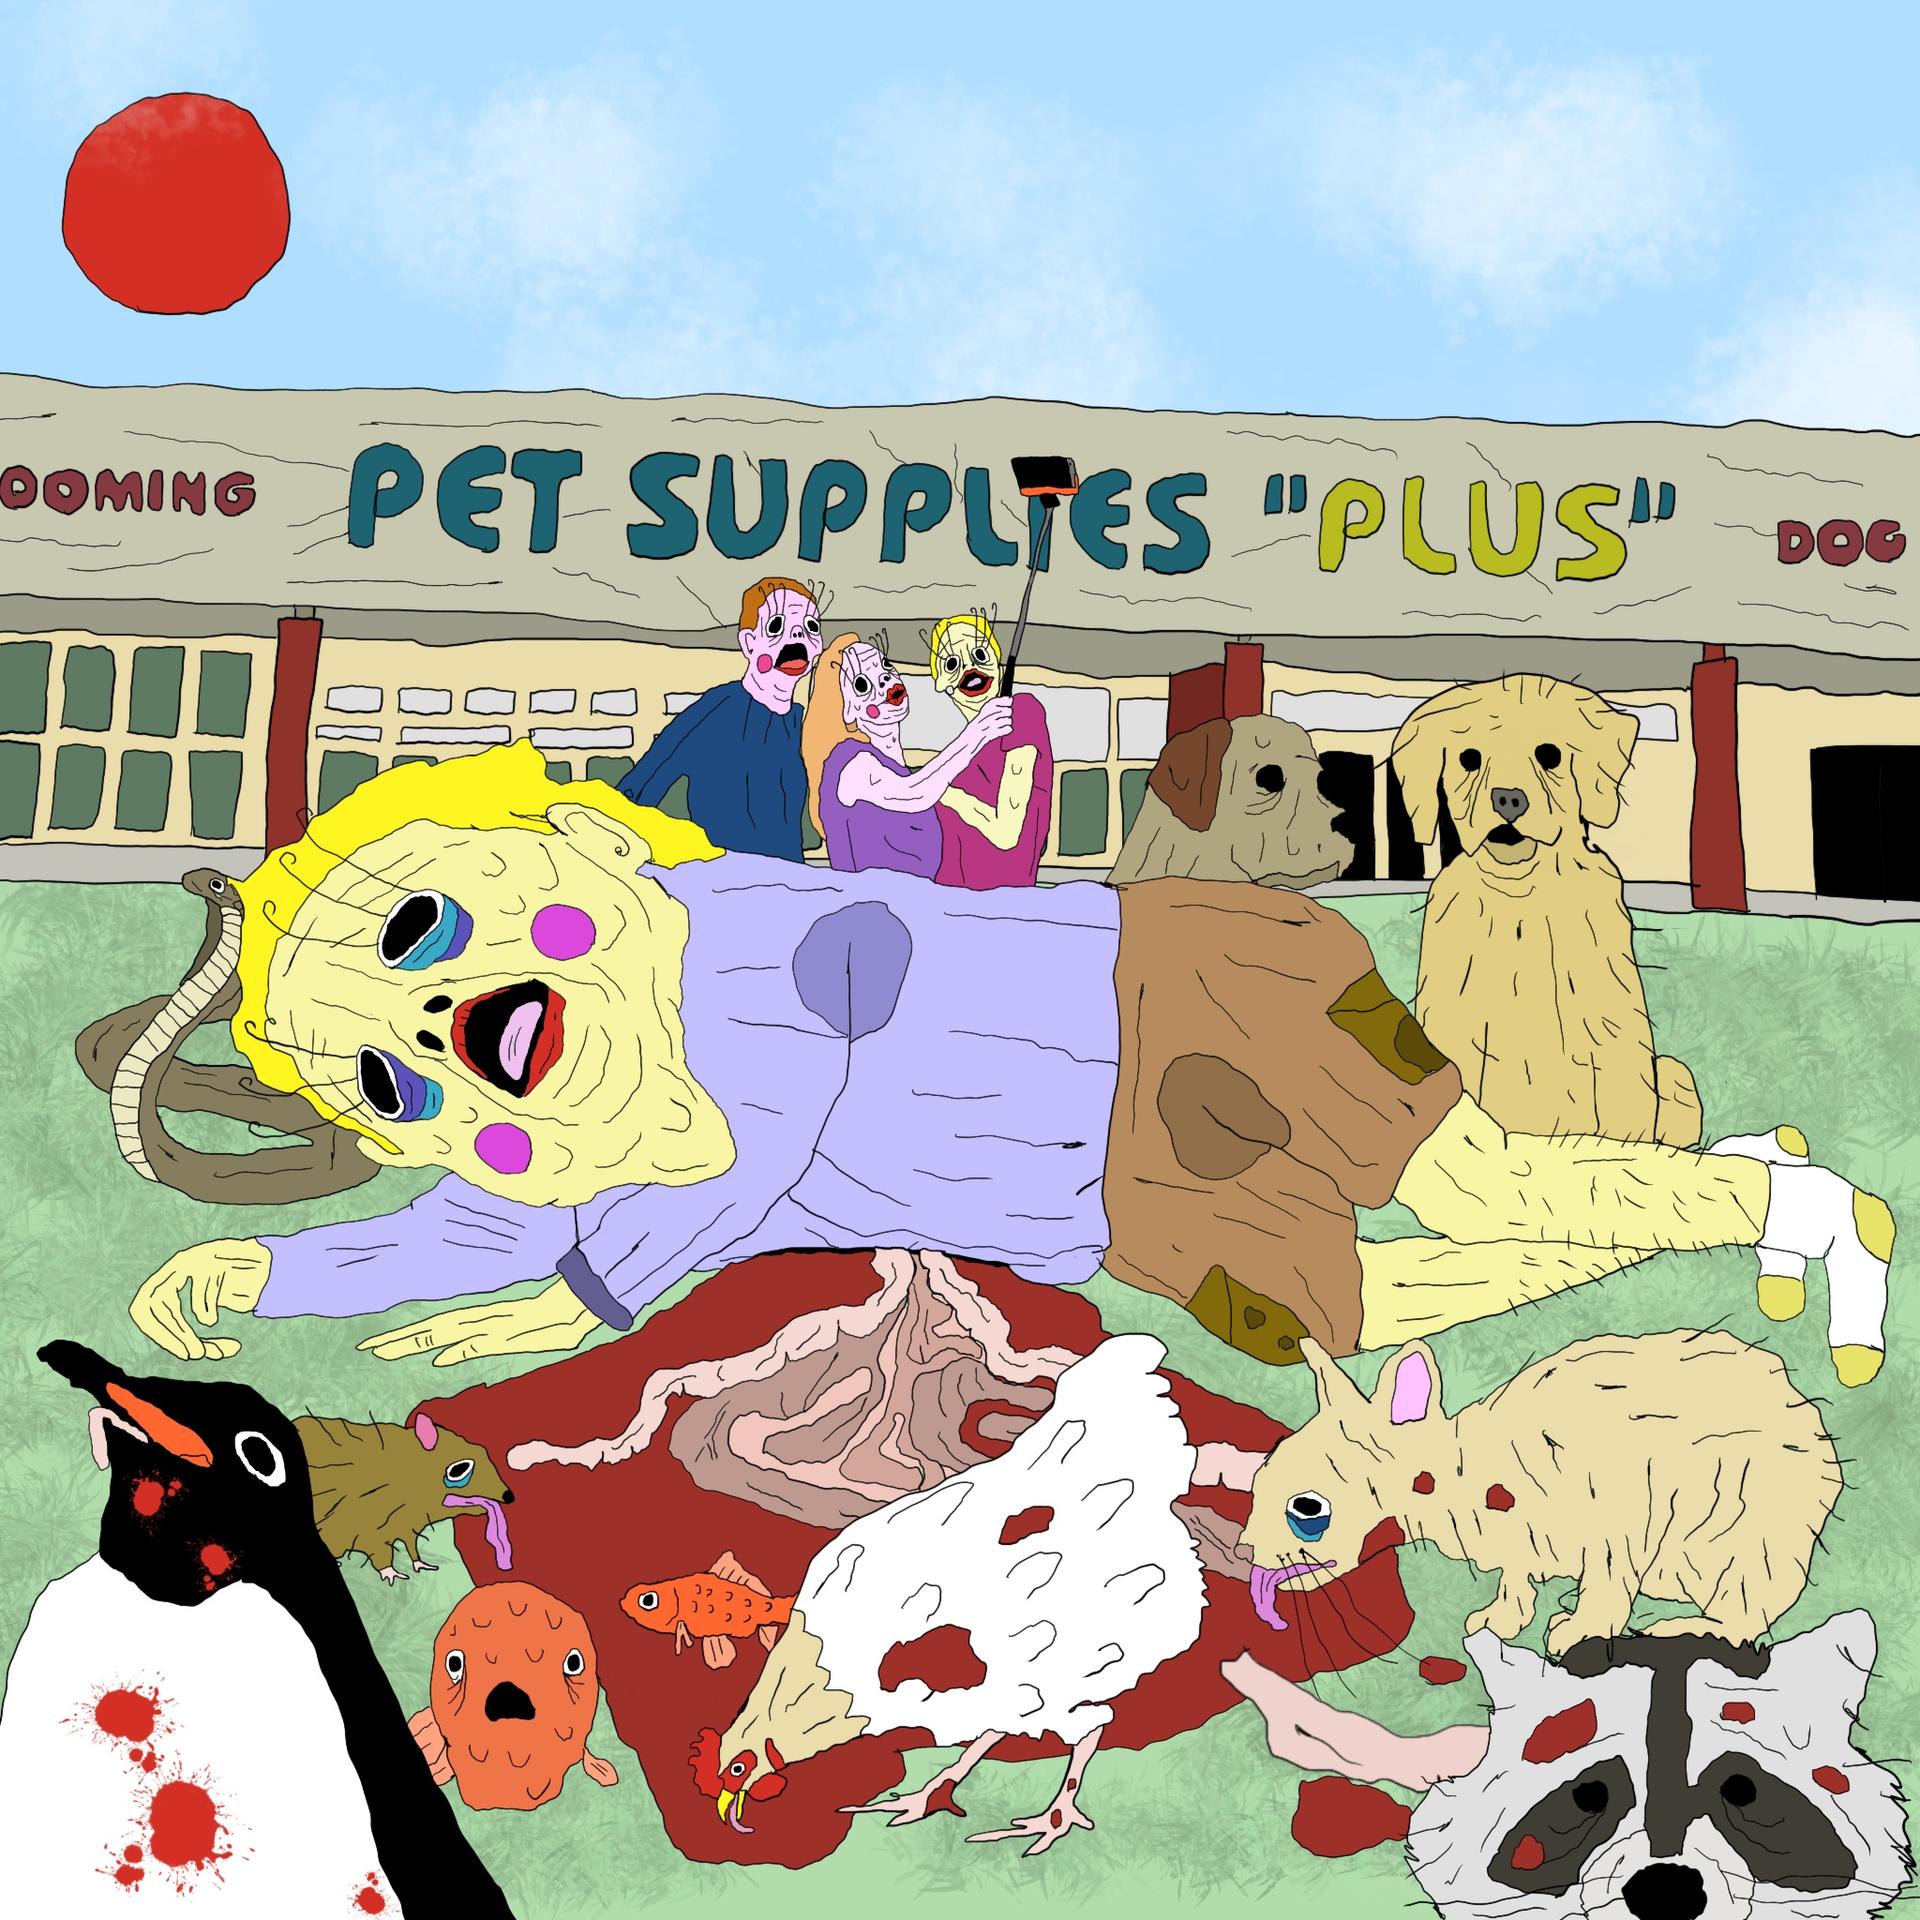 die collecting avatars at a pet supplies plus image